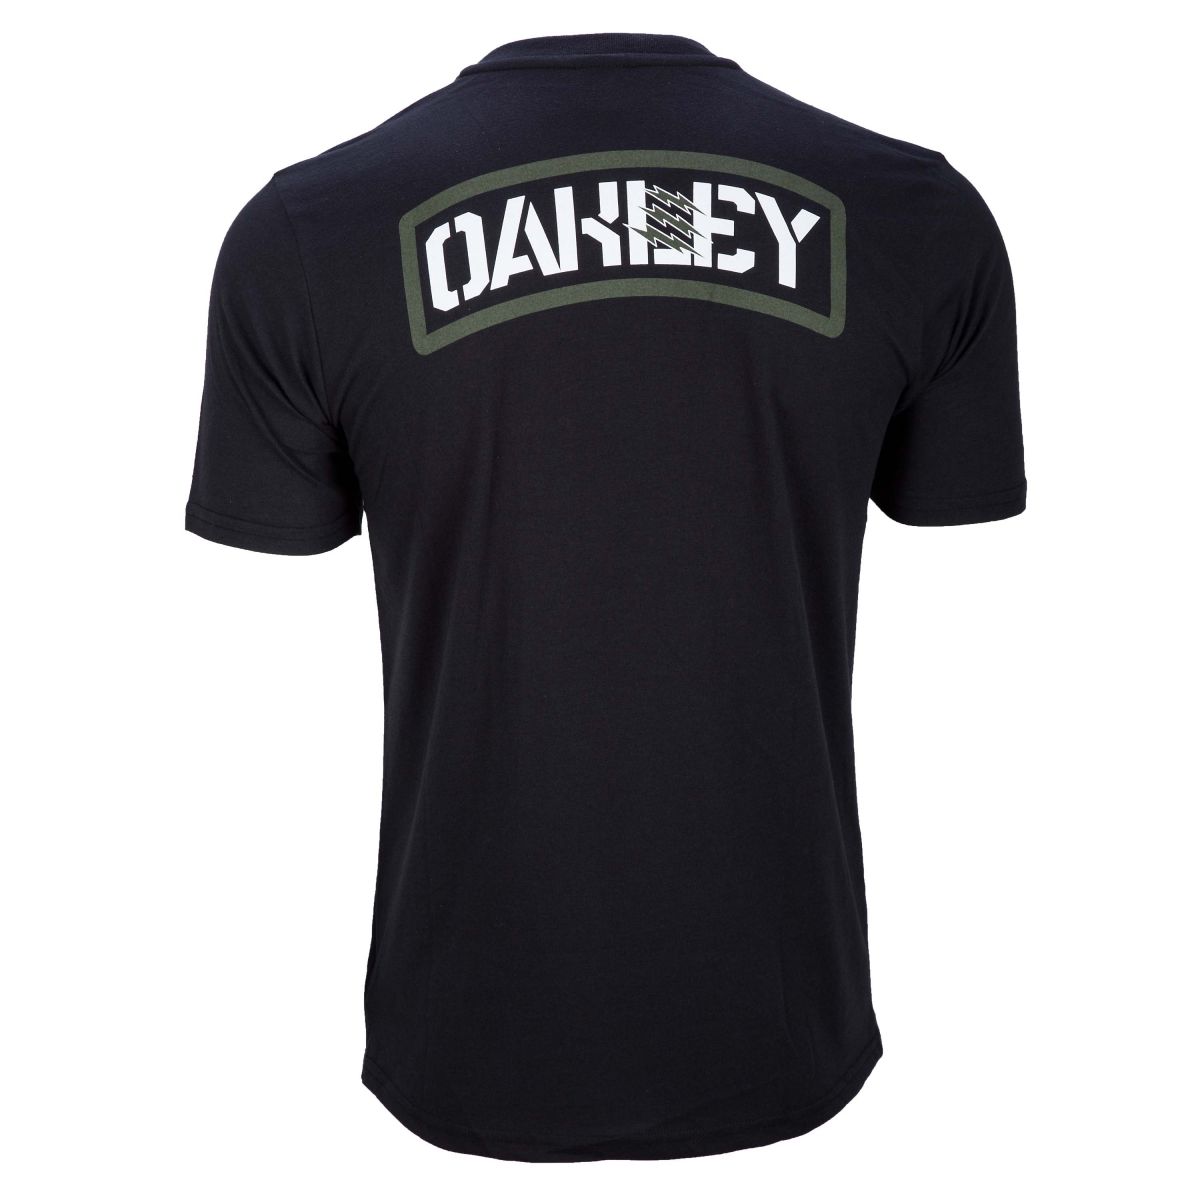 00s oakley archive technical game shirts+golnoorclub.com